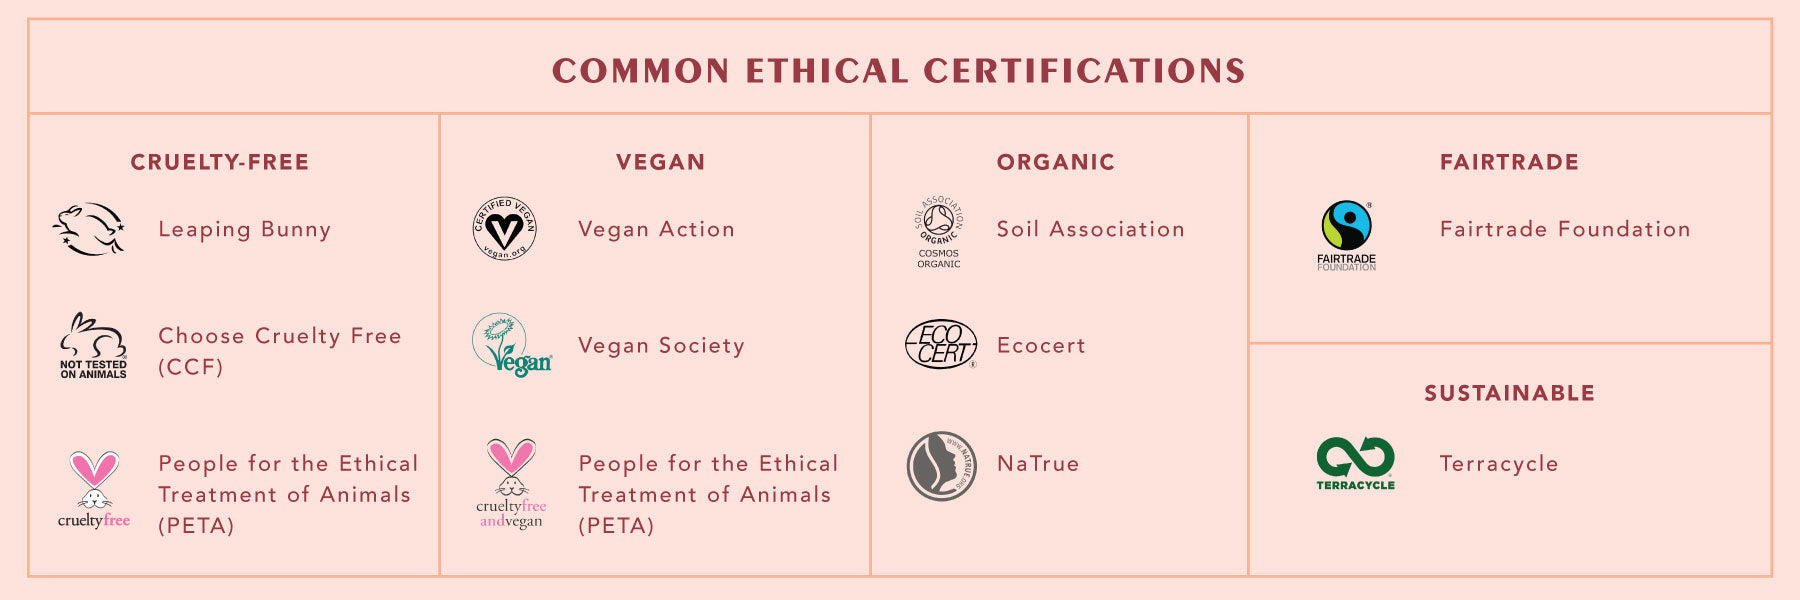 Common Ethical Certifications for Ethical Beauty (Credit: Time to Get Clean)